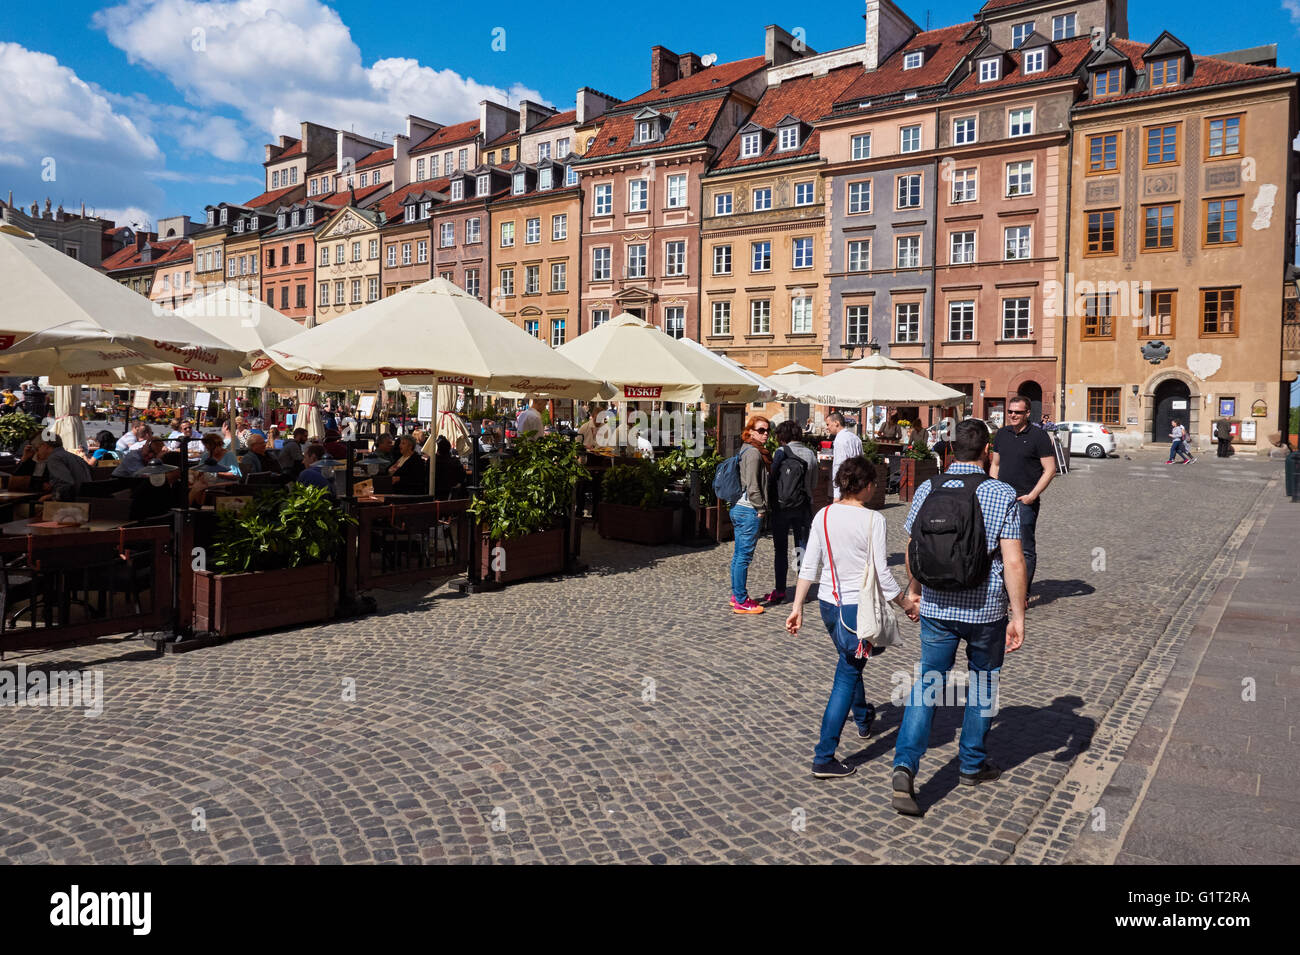 The Old Town Market Place in Warsaw, Poland Stock Photo